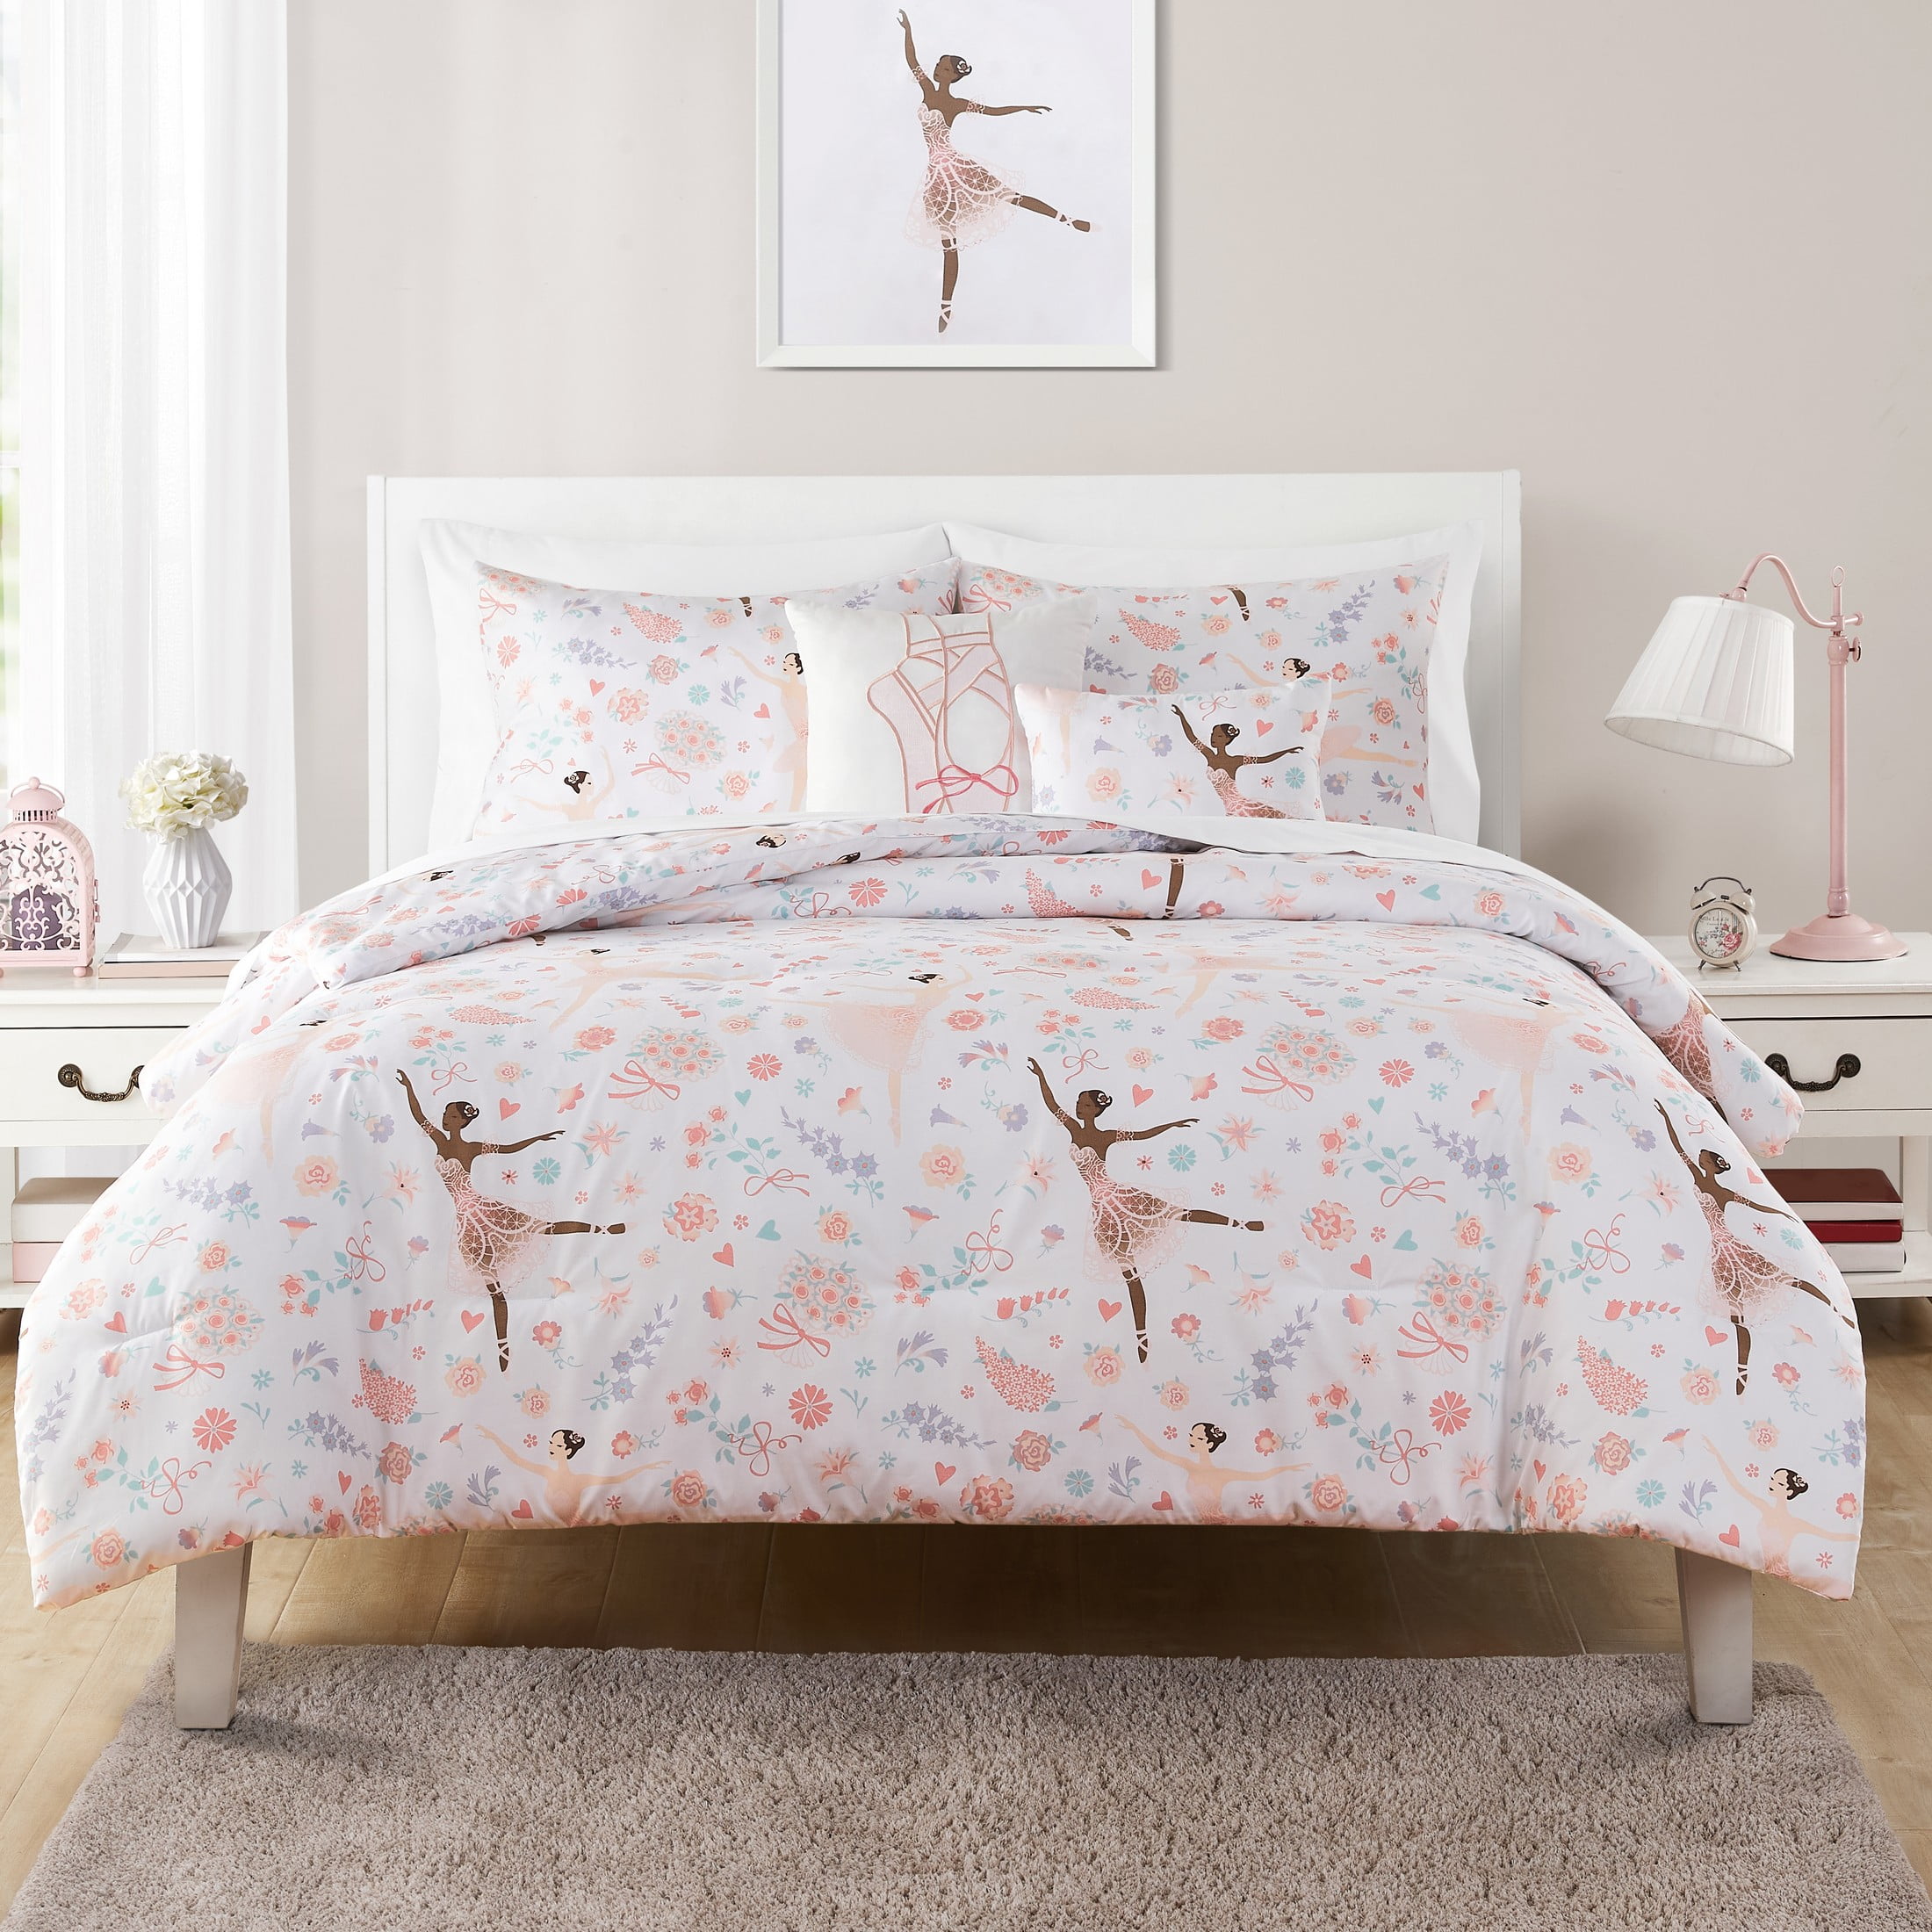 Pottery Barn kids Twin Comforter and Pillow Sham Pink Floral 66w x 88L 